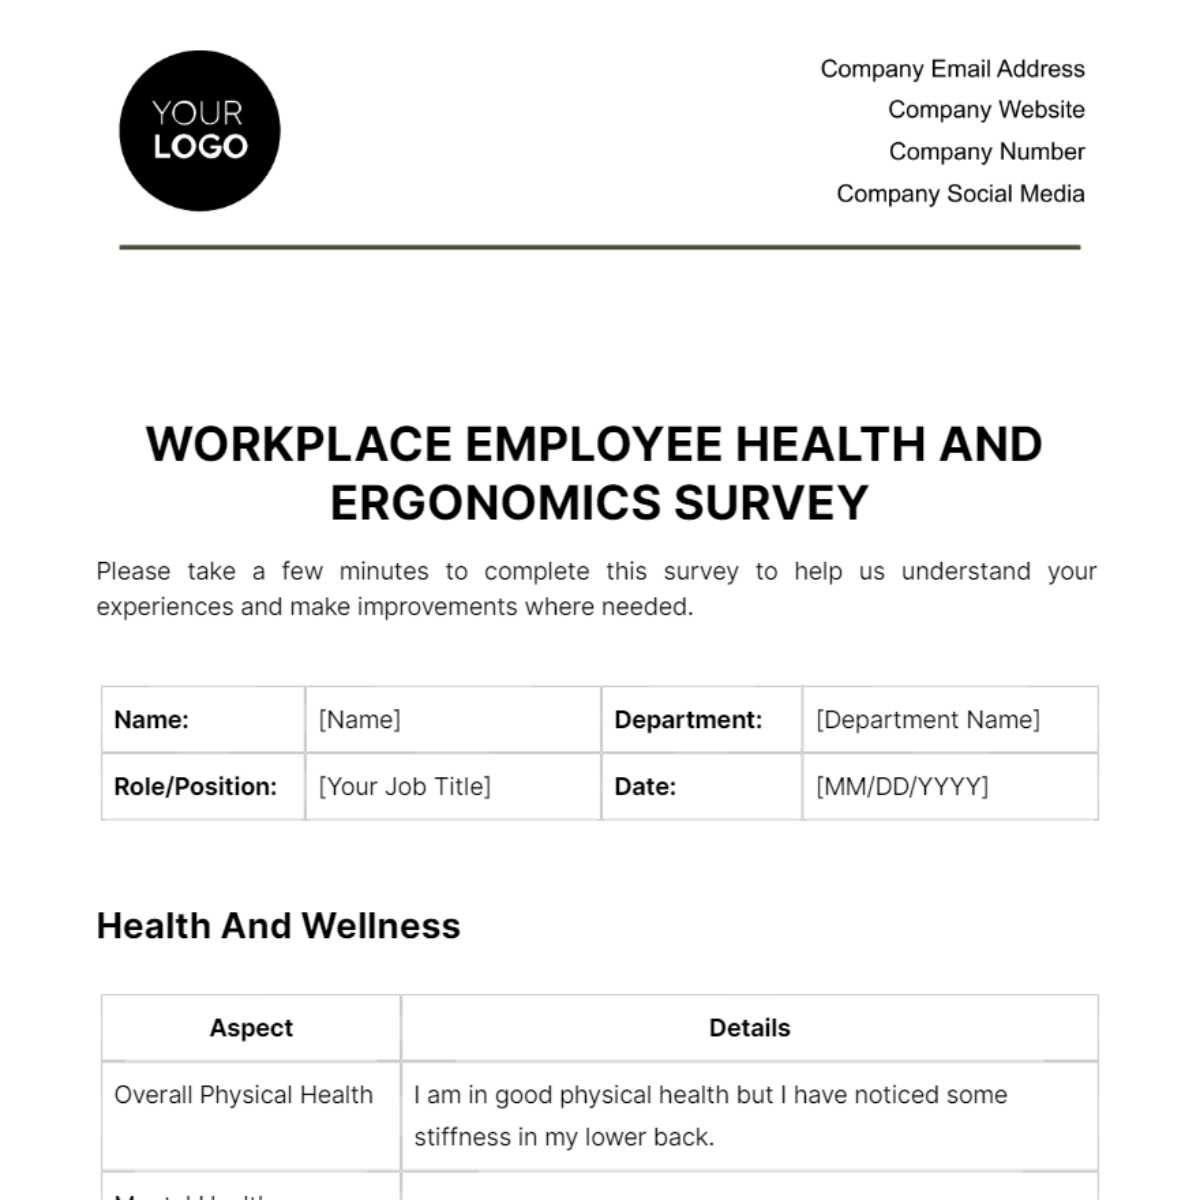 Free Workplace Employee Health and Ergonomics Survey Template